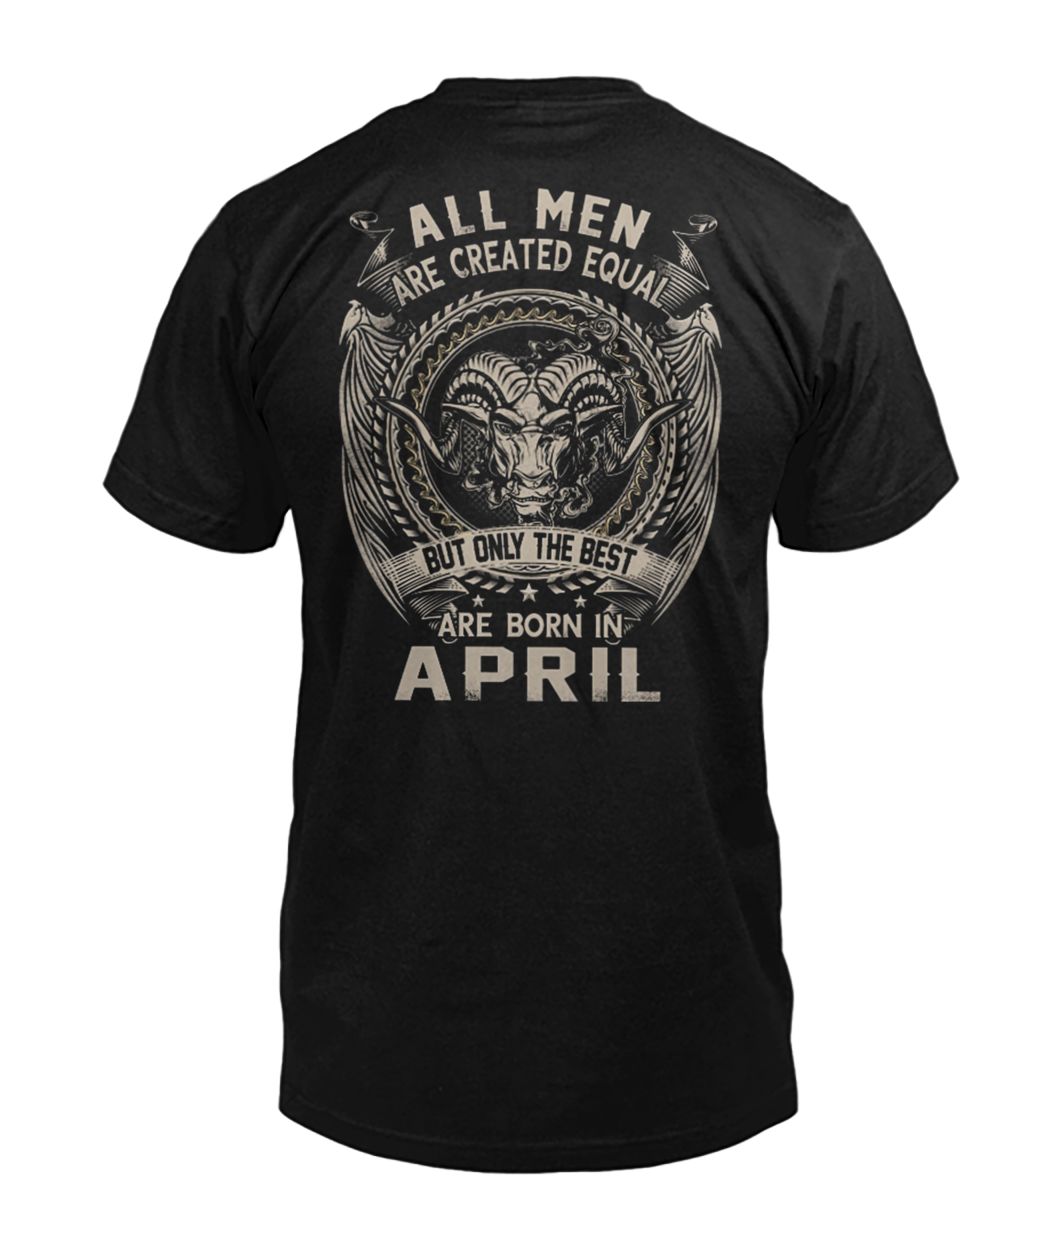 All men created equal but the best are born in april mens v-neck